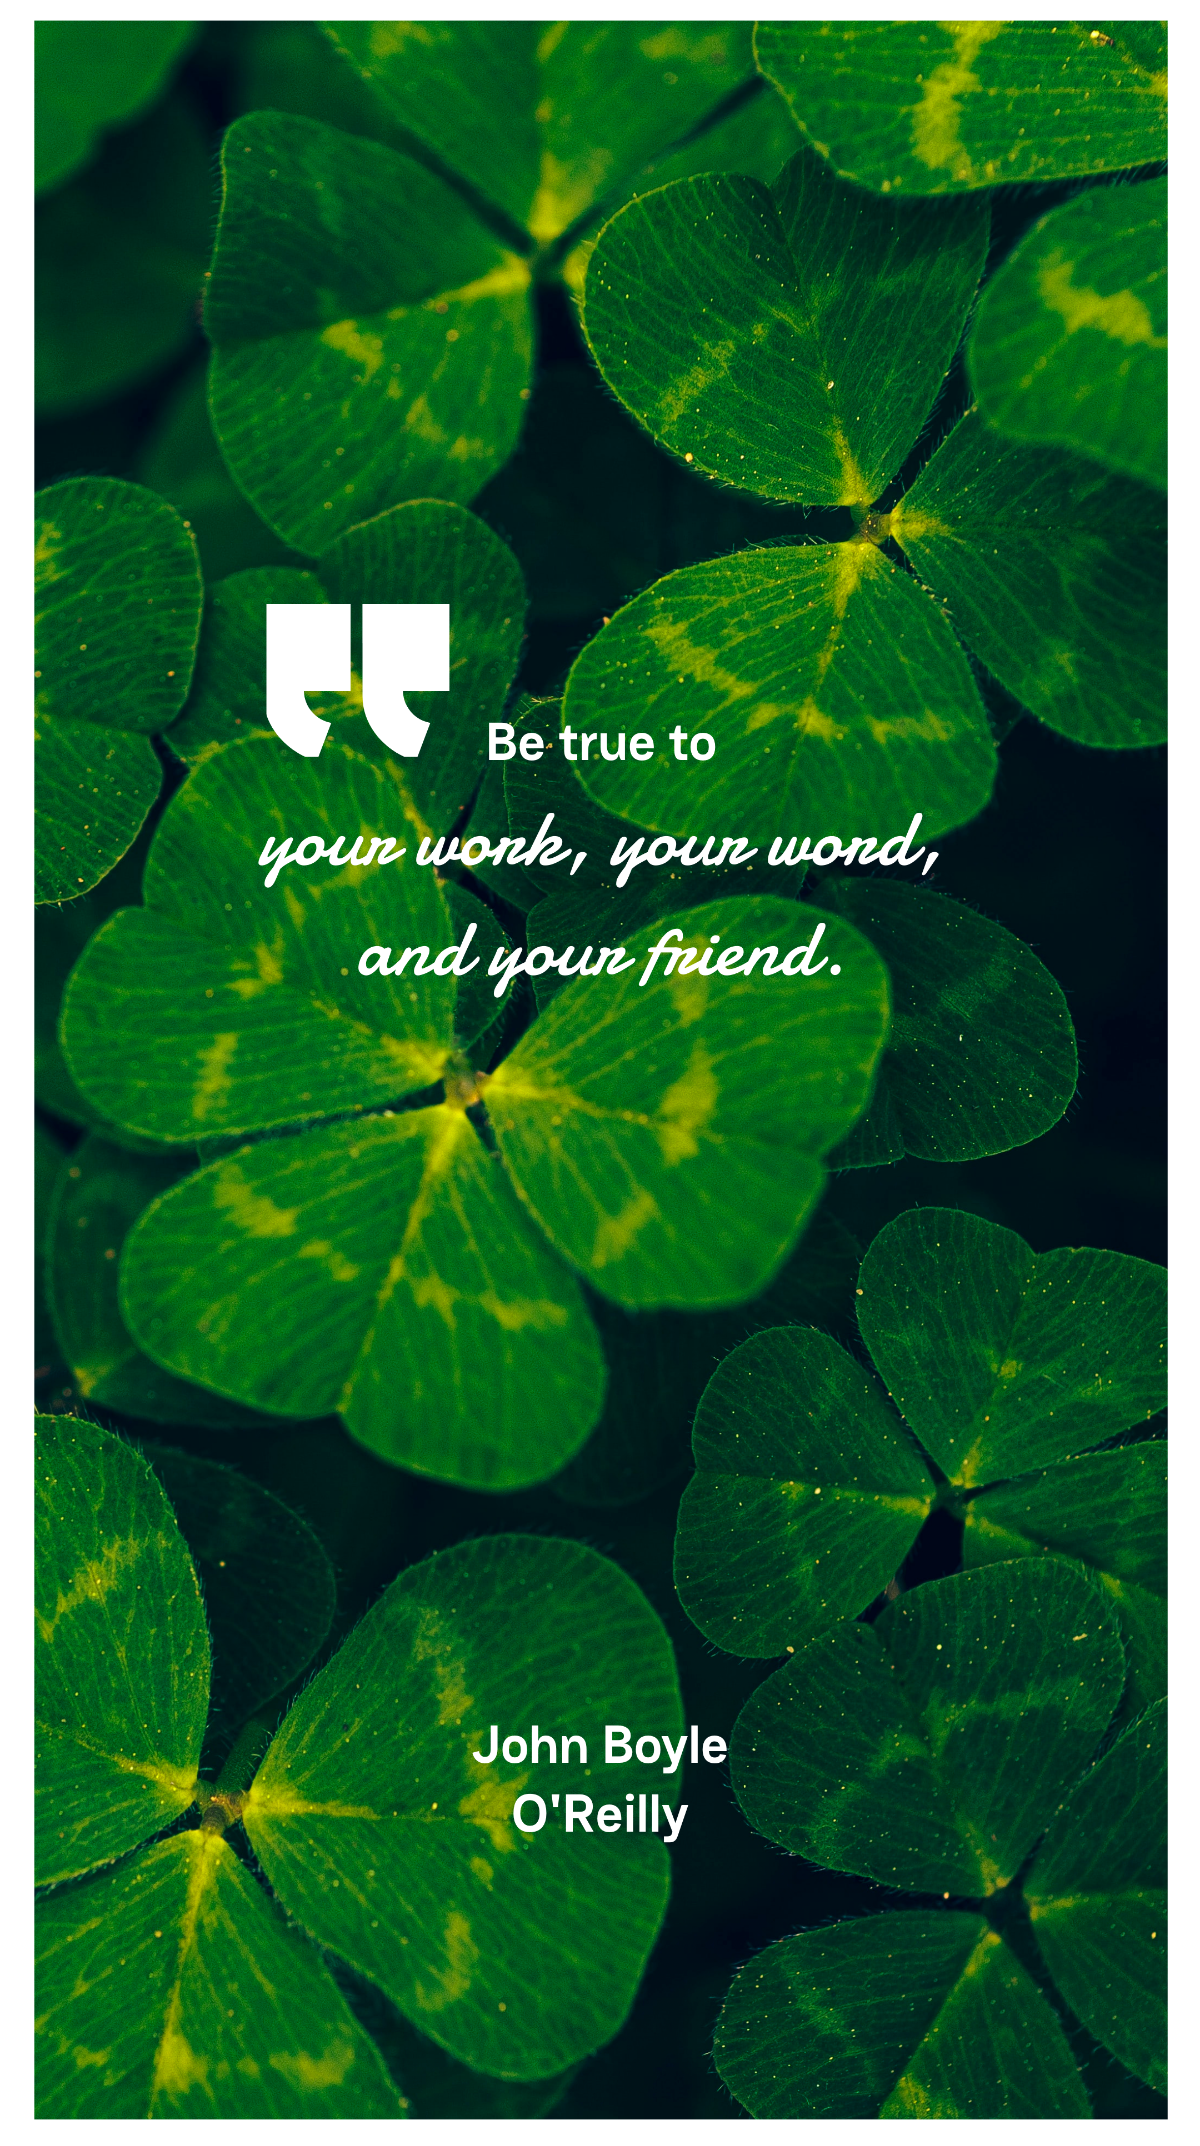 Free John Boyle O'Reilly - Be true to your work, your word, and your friend. Template